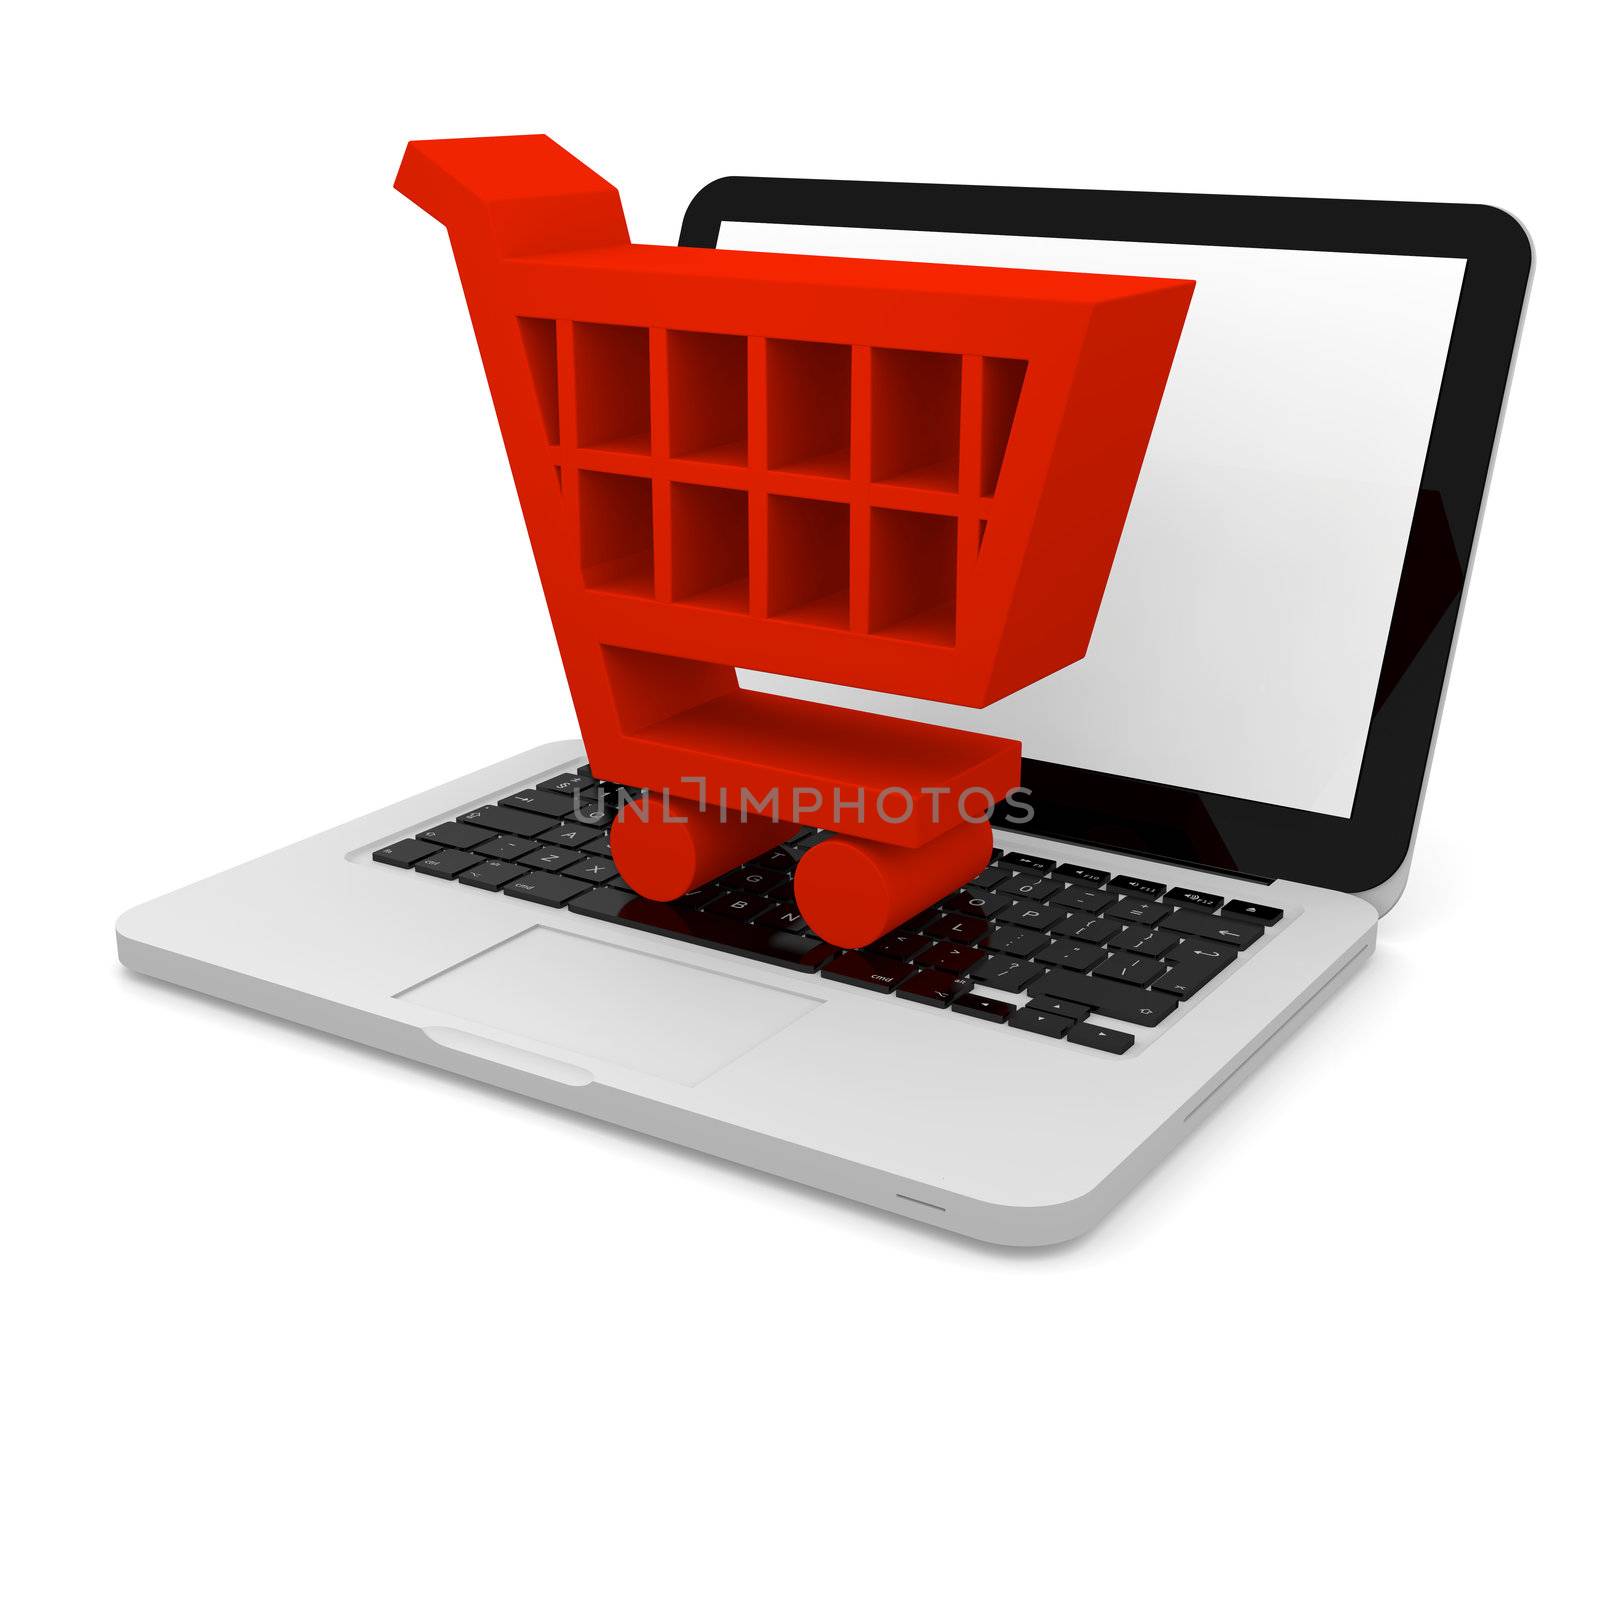 Shopping trolley on laptop by Harvepino